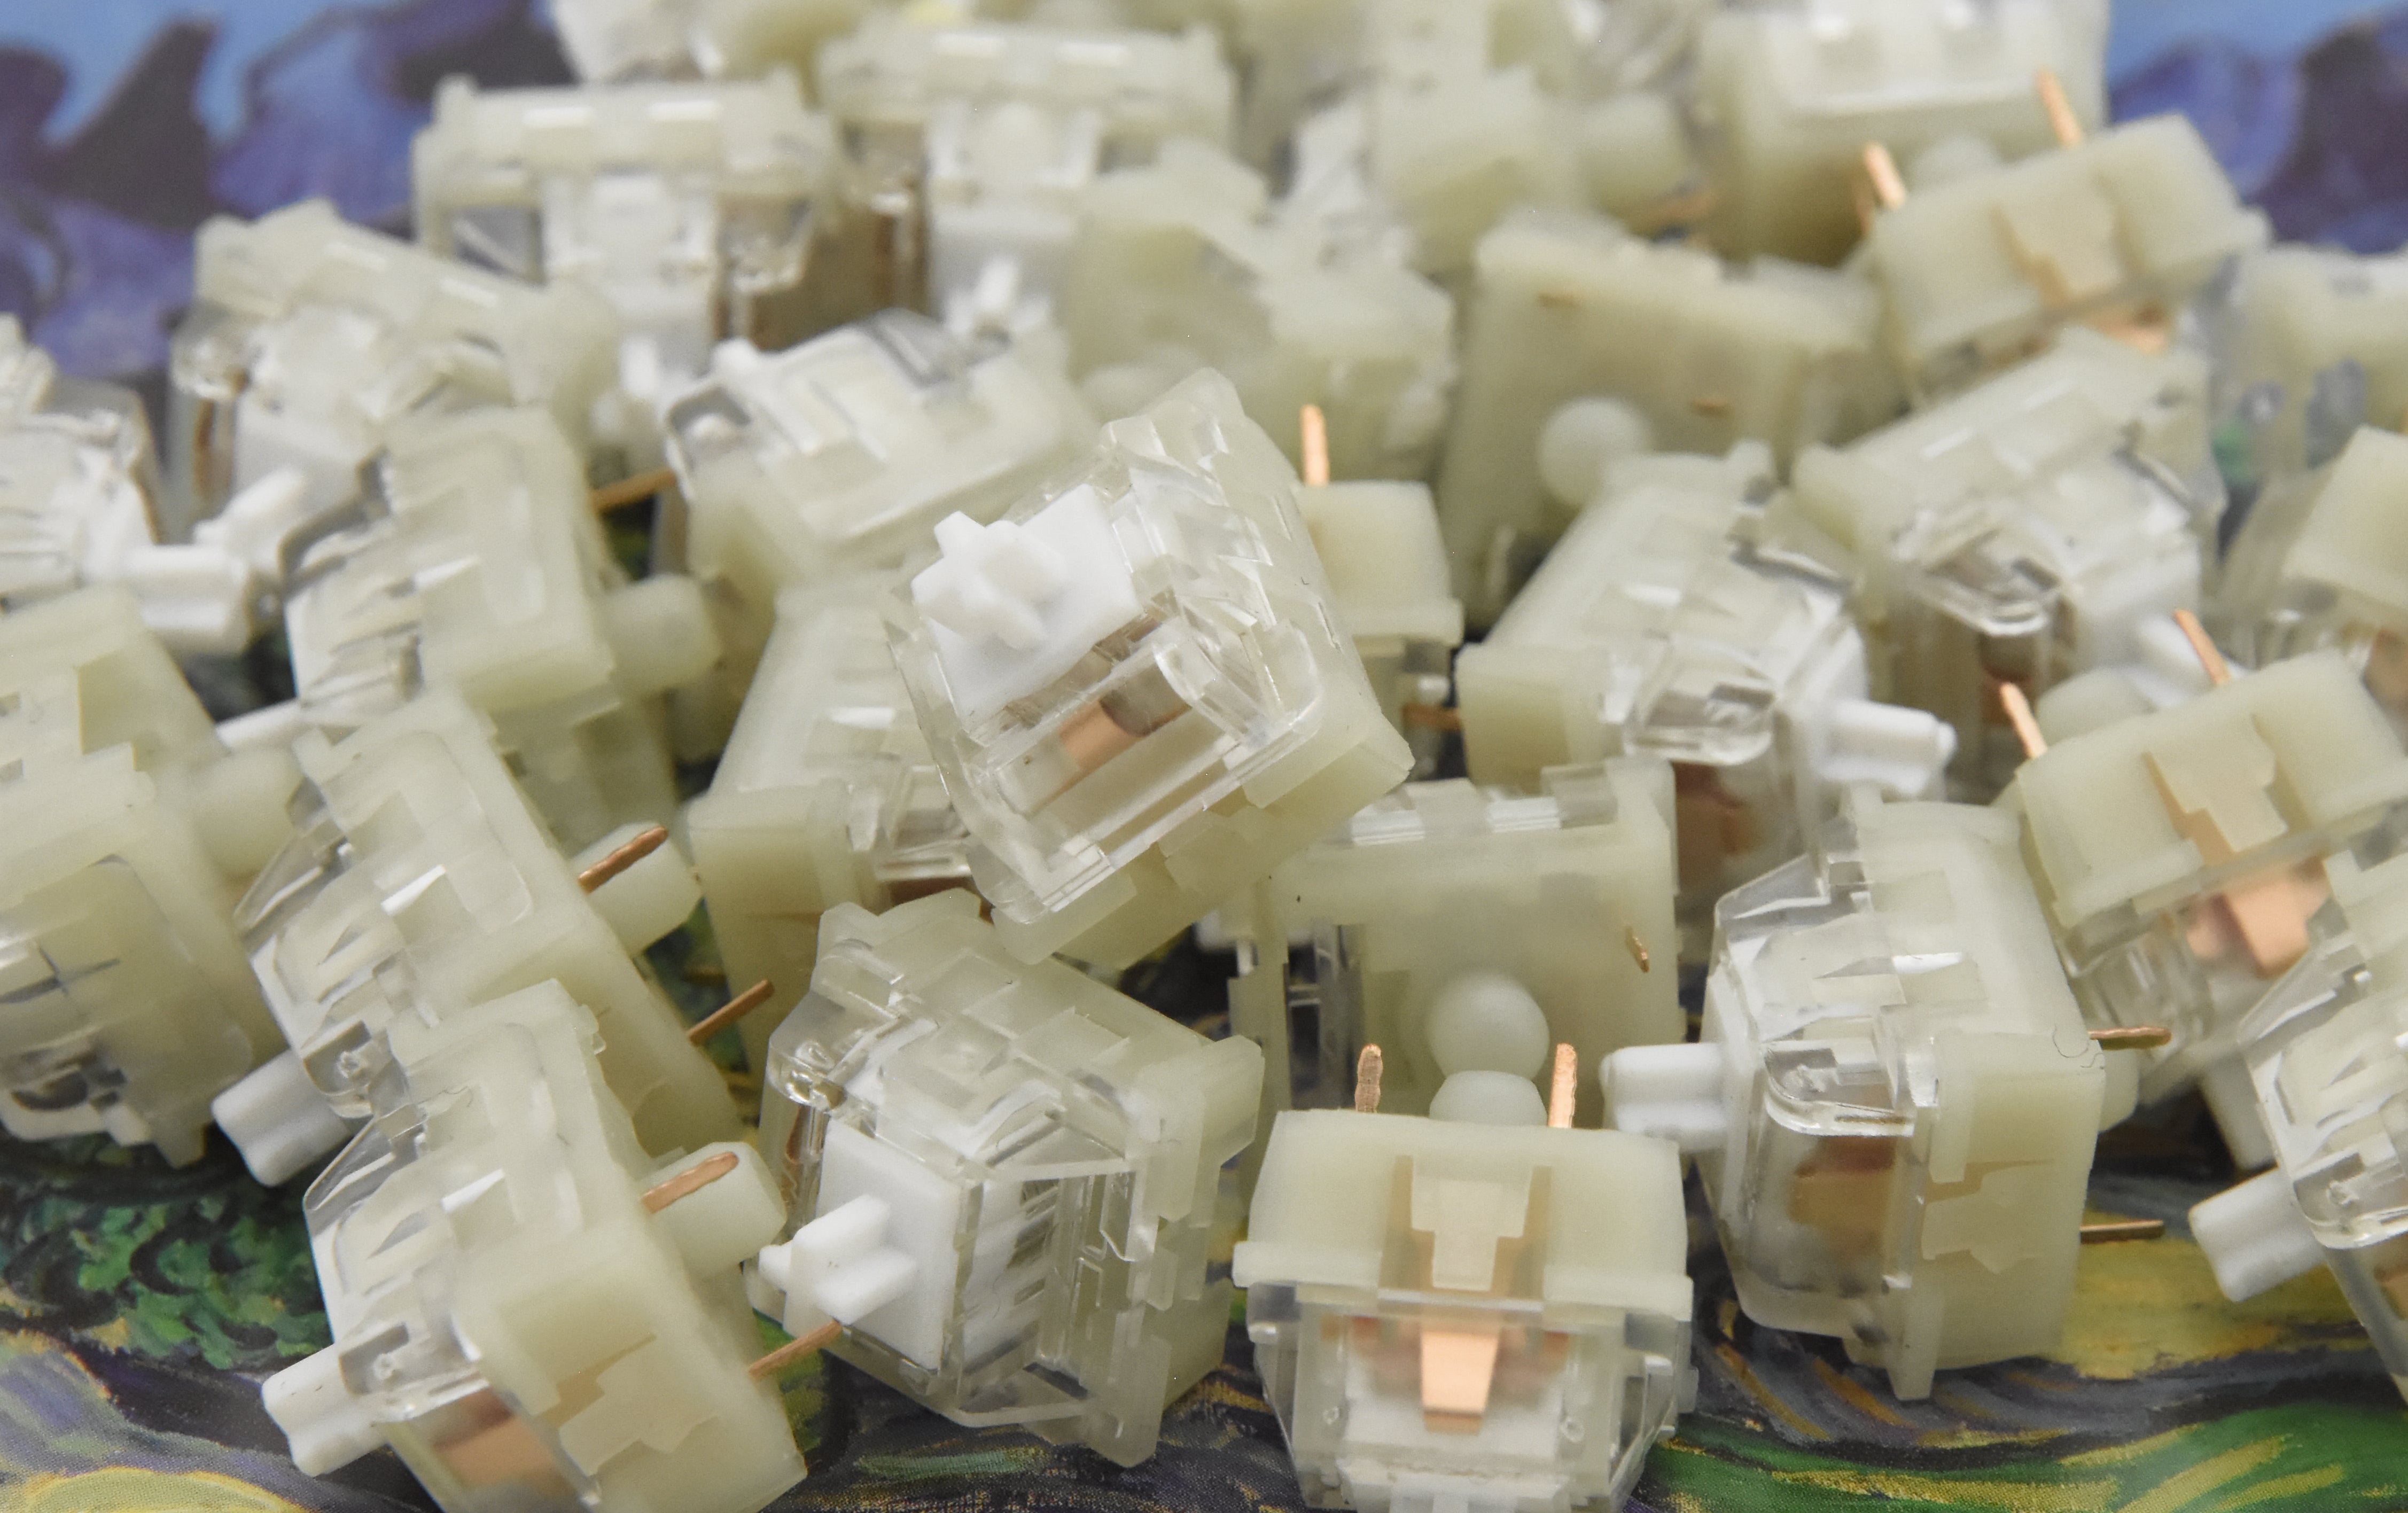 KTT KANG WHITE V3 LINEAR SWITCH FACTORY LUBED EDITION (10PCS)